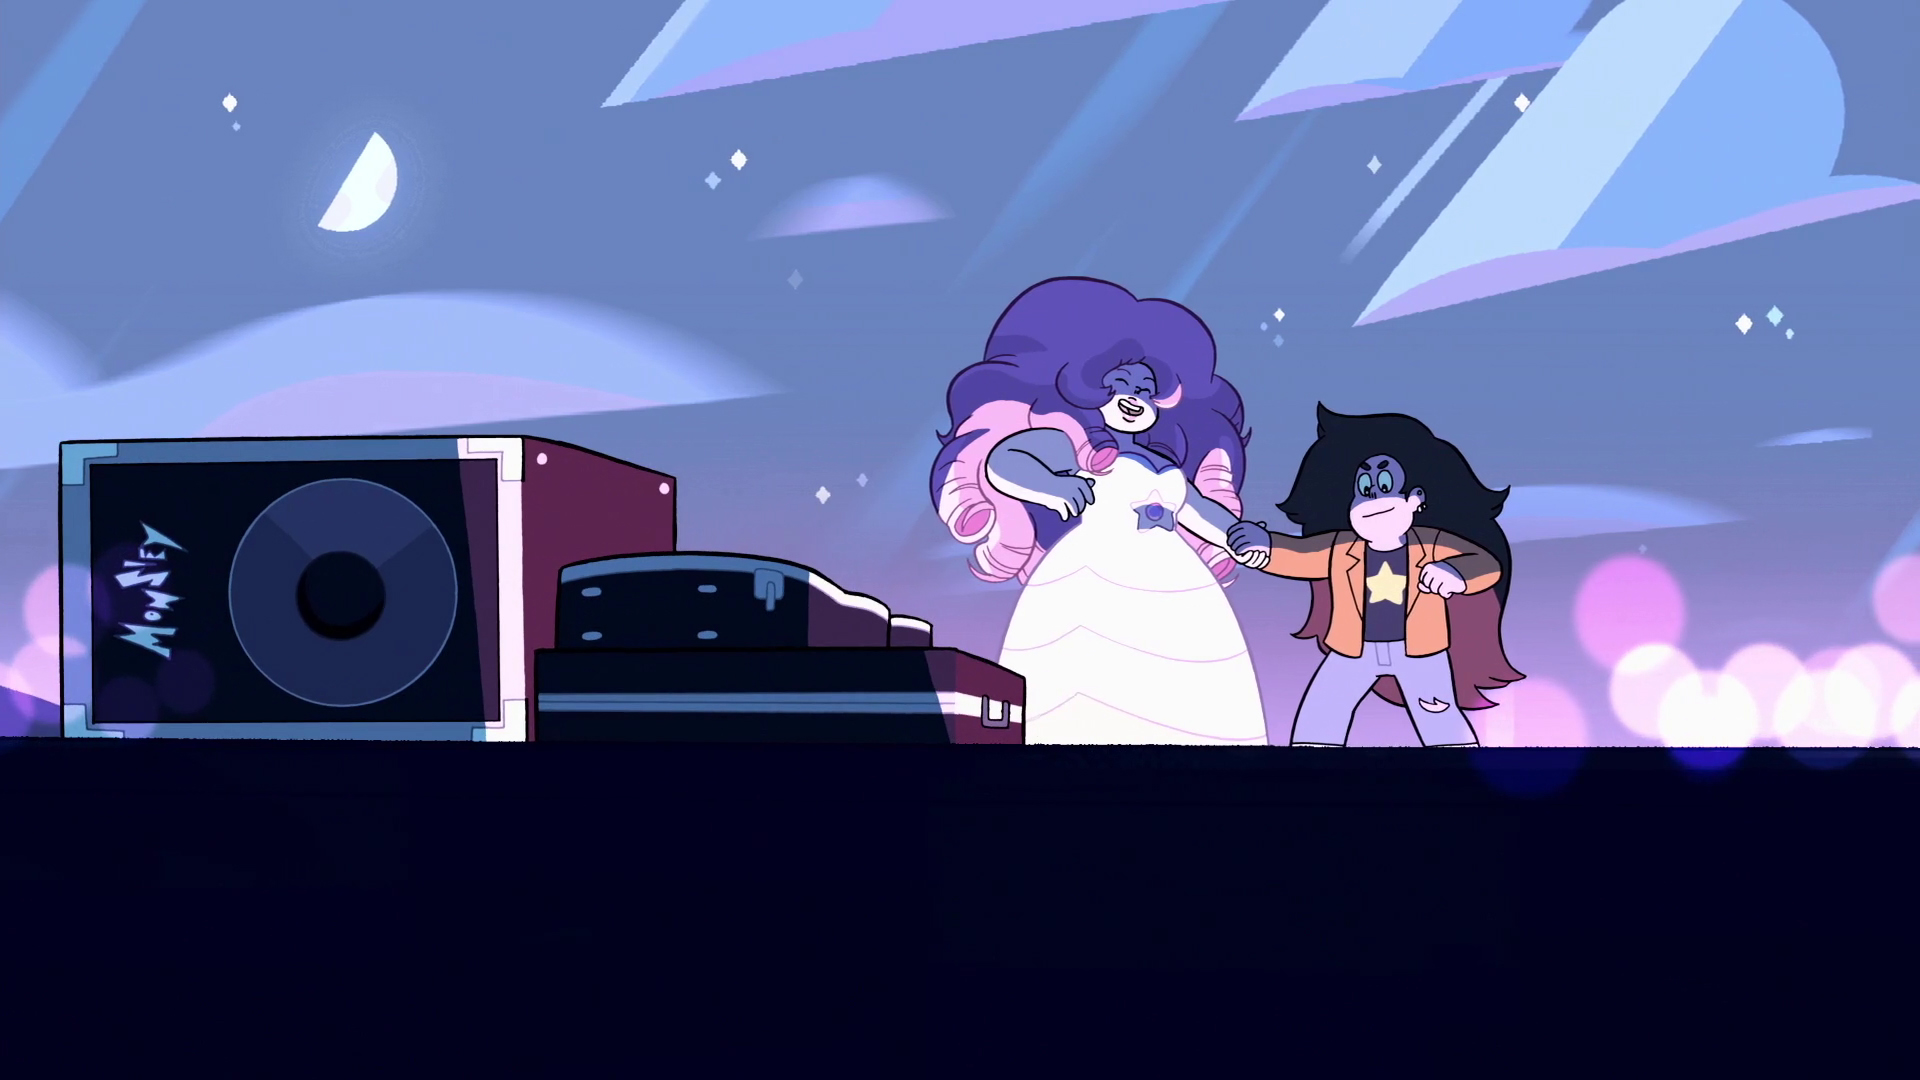 Steven Universe Greg Universe With Black Hair And Brown Coat Rose Quartz With White Gown Purple And Pink Hair With Wallpaper Of Purple Sky And Moon 2K Movies